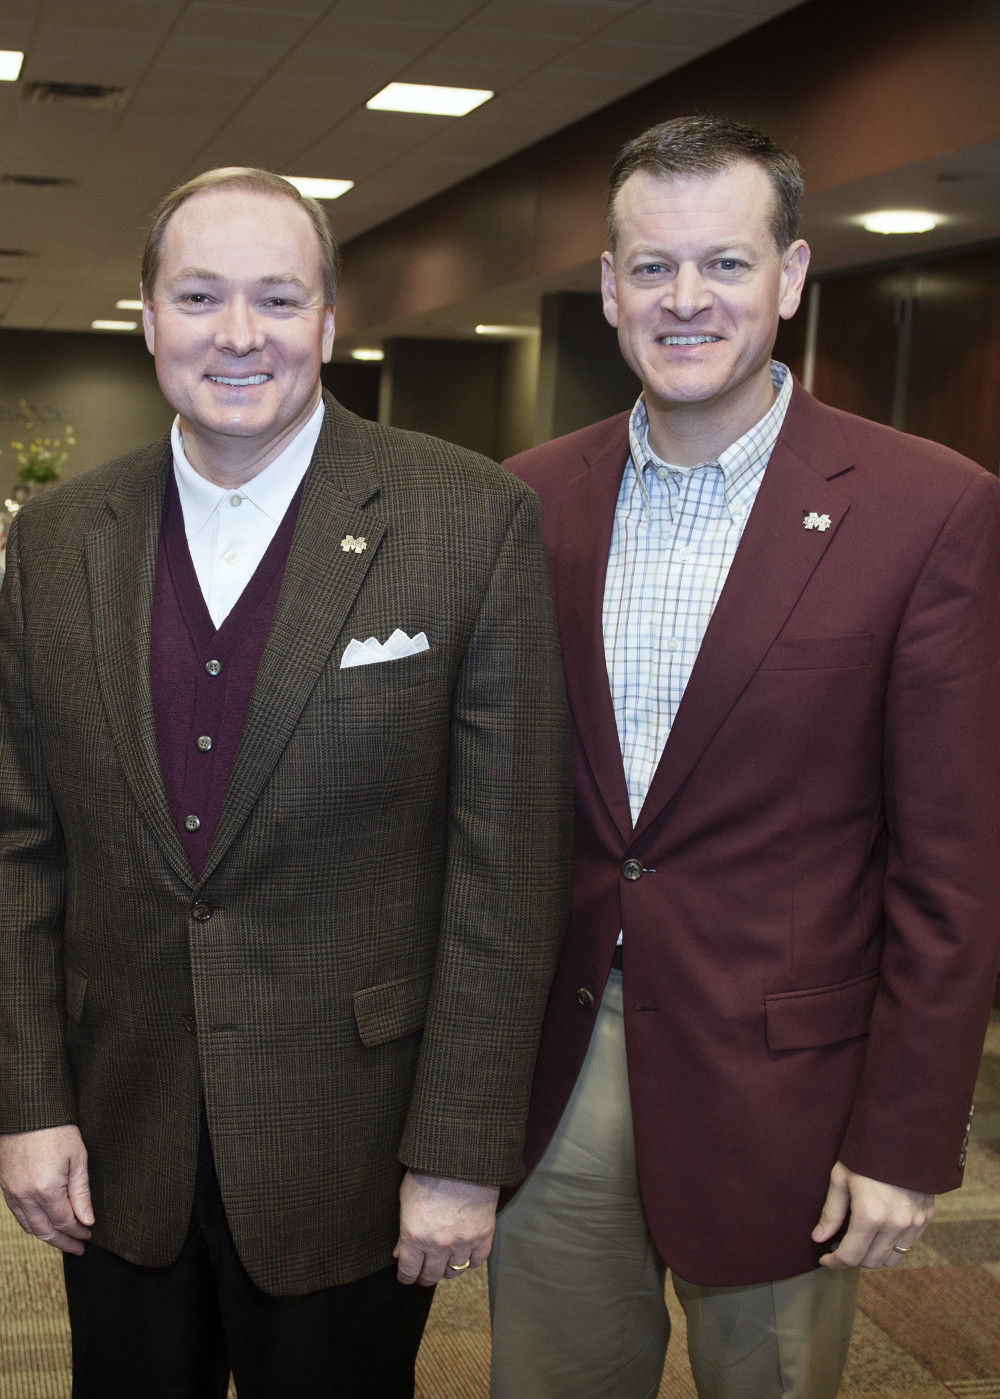 MSU President Mark E. Keenum, left, pictured with Scott Stricklin. Keenum today announced a nationwide search to choose the institution’s 17th director of athletics to replace Stricklin, who has accepted the athletic director’s job at the University of Florida. (Photo by Megan Bean)